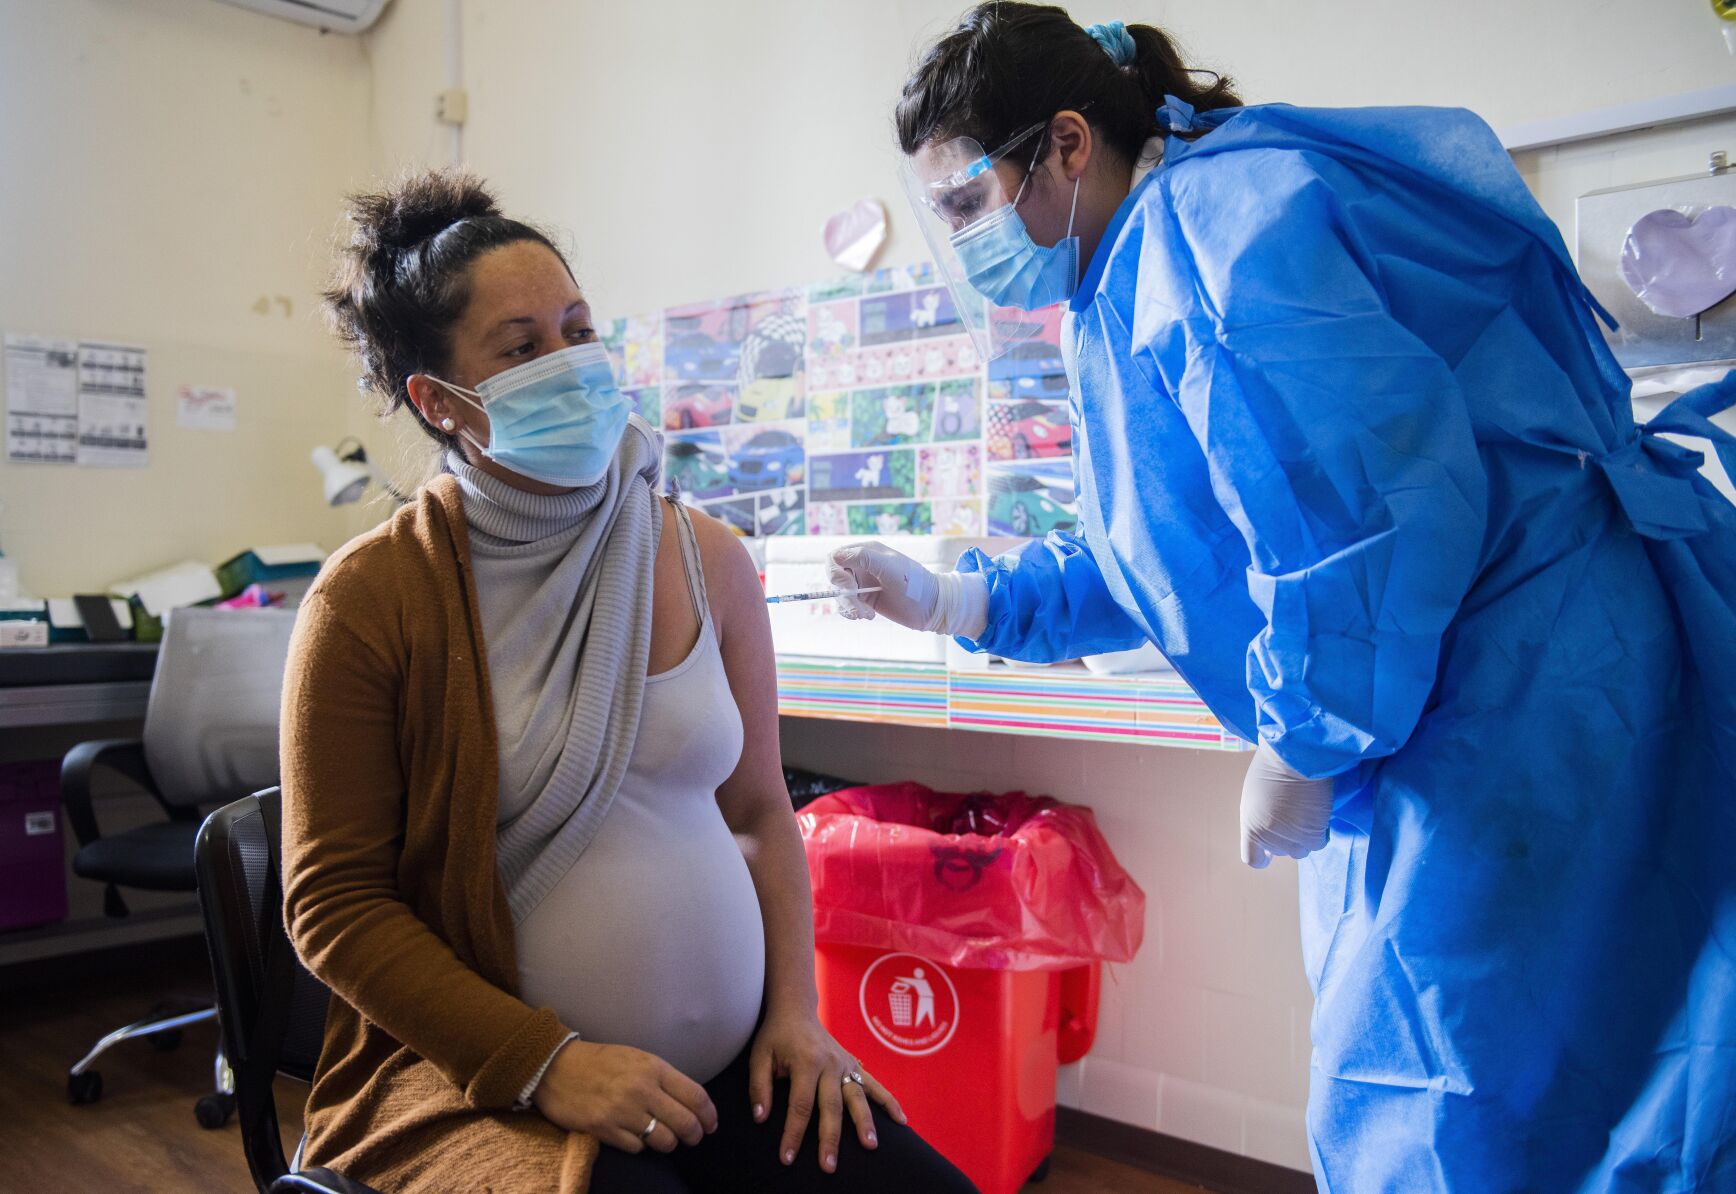 Pregnant, unvaccinated and intubated: Doctors alarmed by rise in